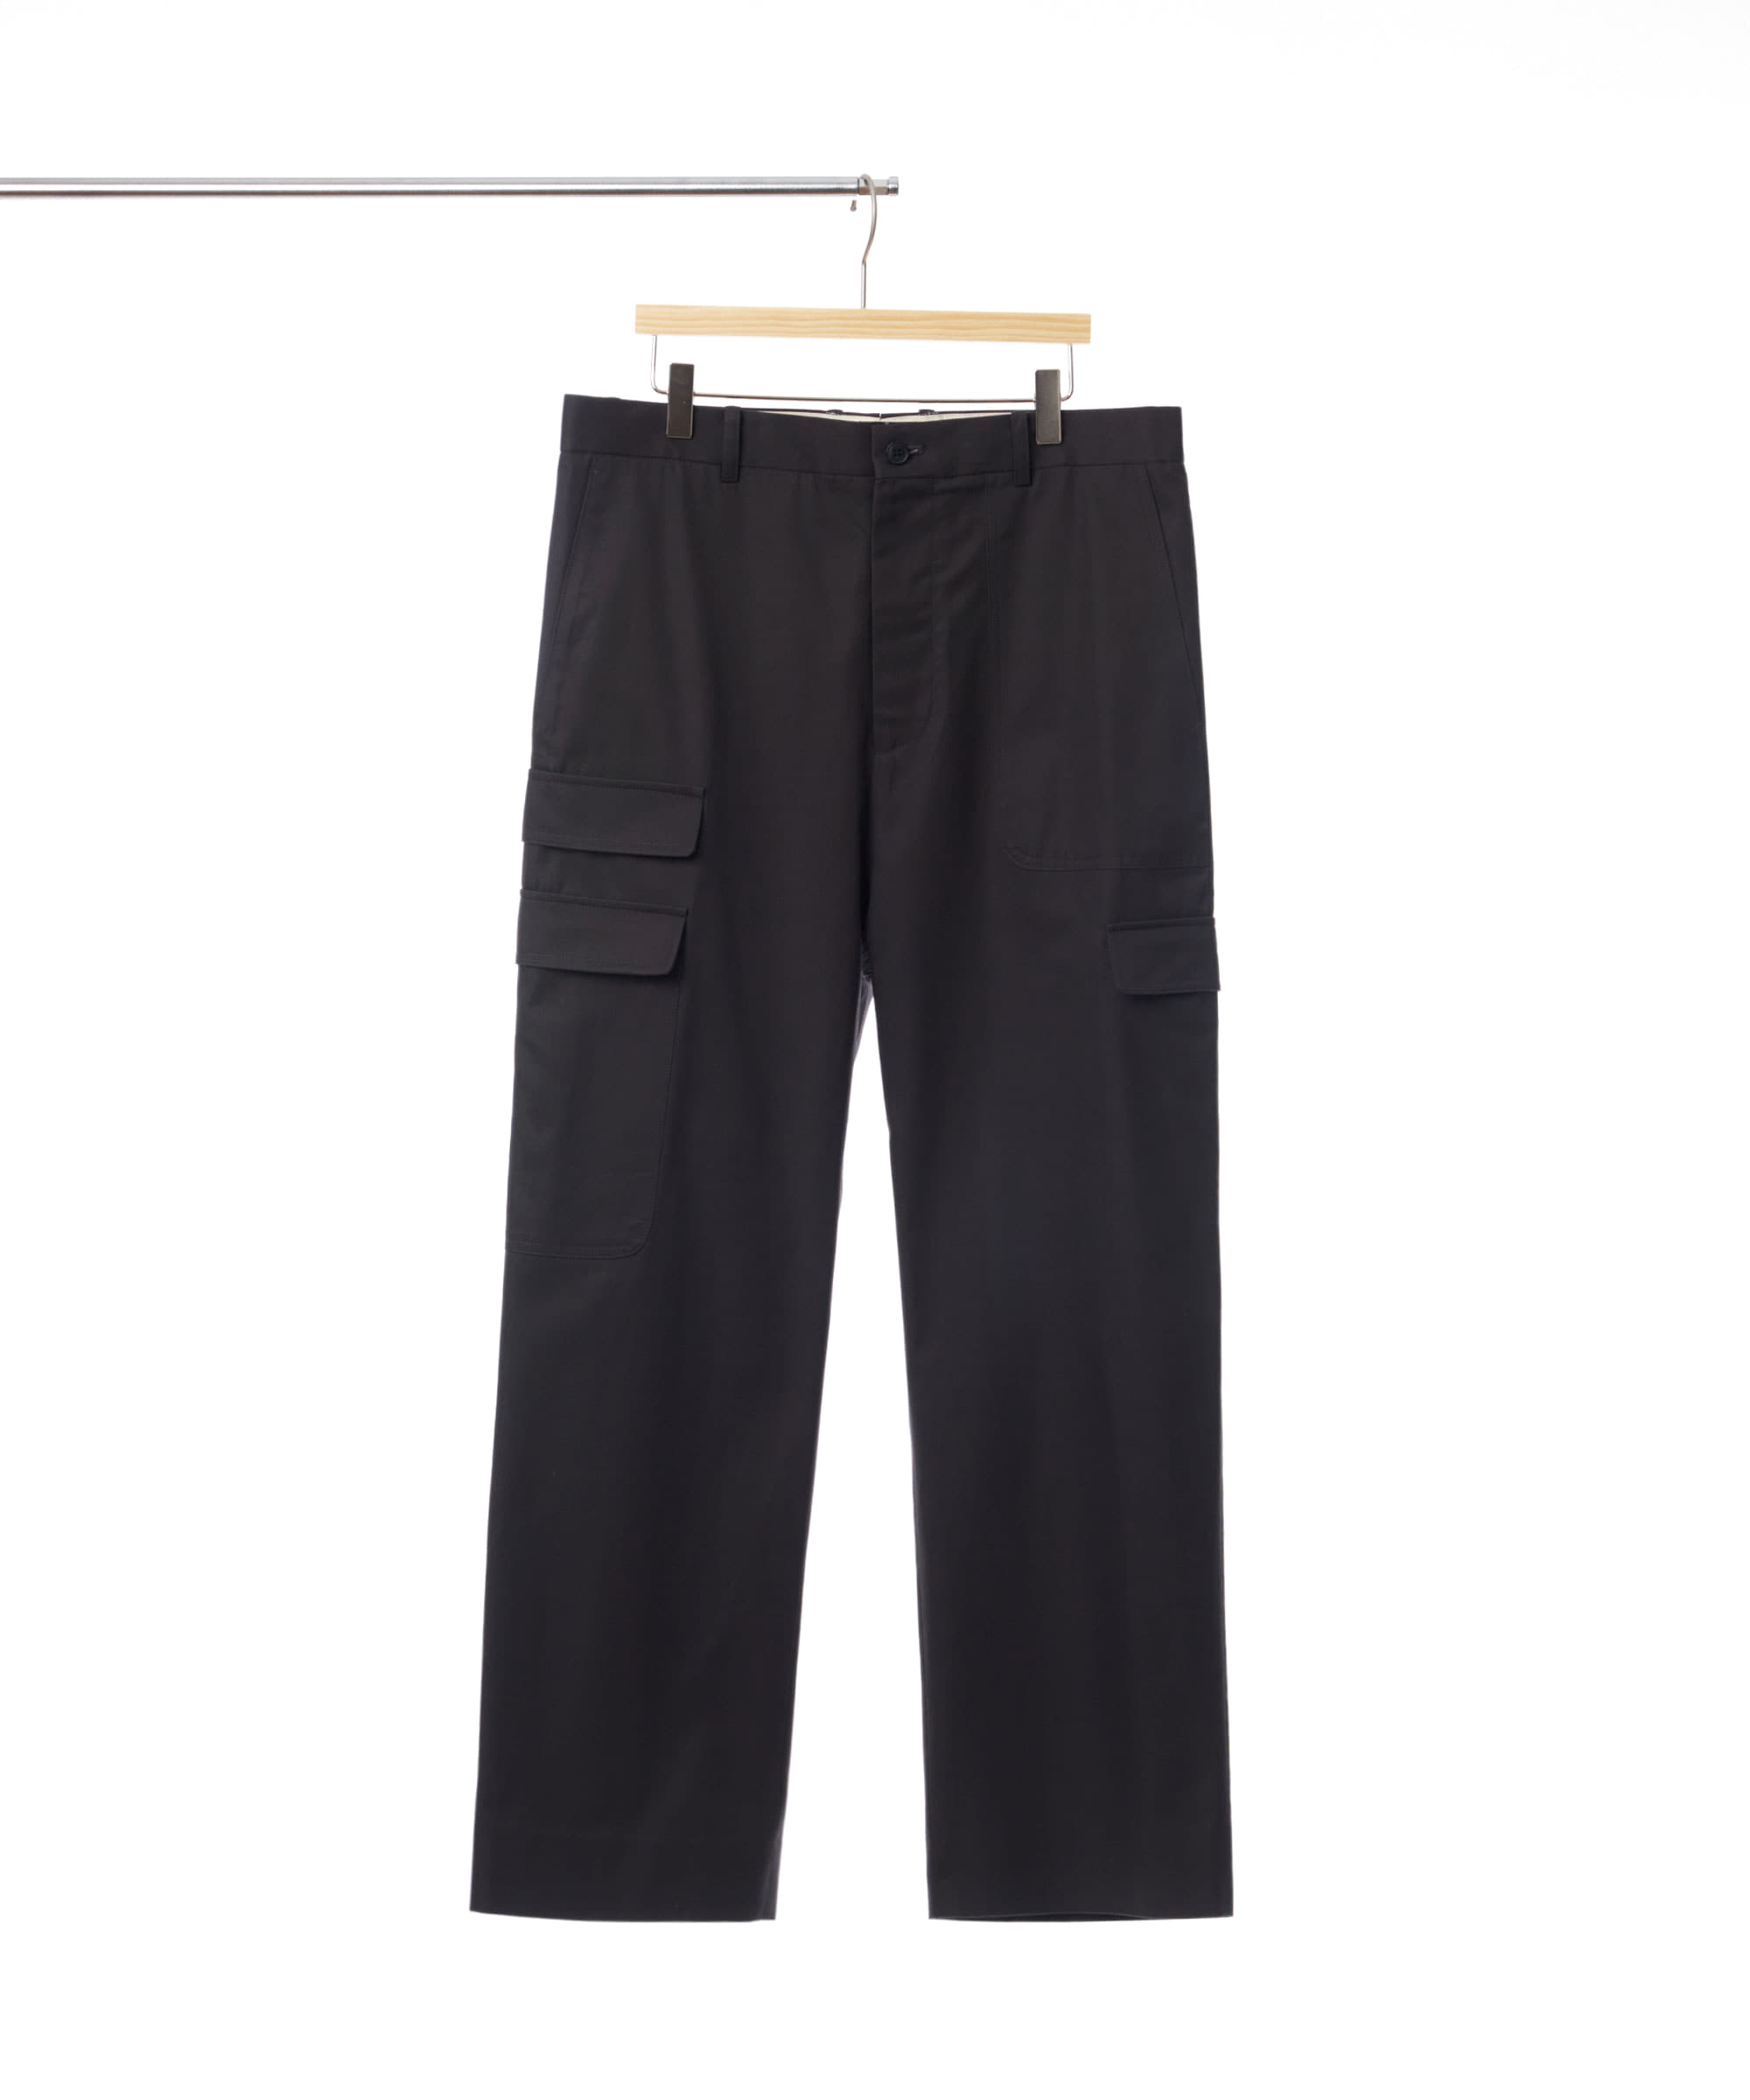 CHARCOAL MULTI POCKET FATIGUE TROUSERS